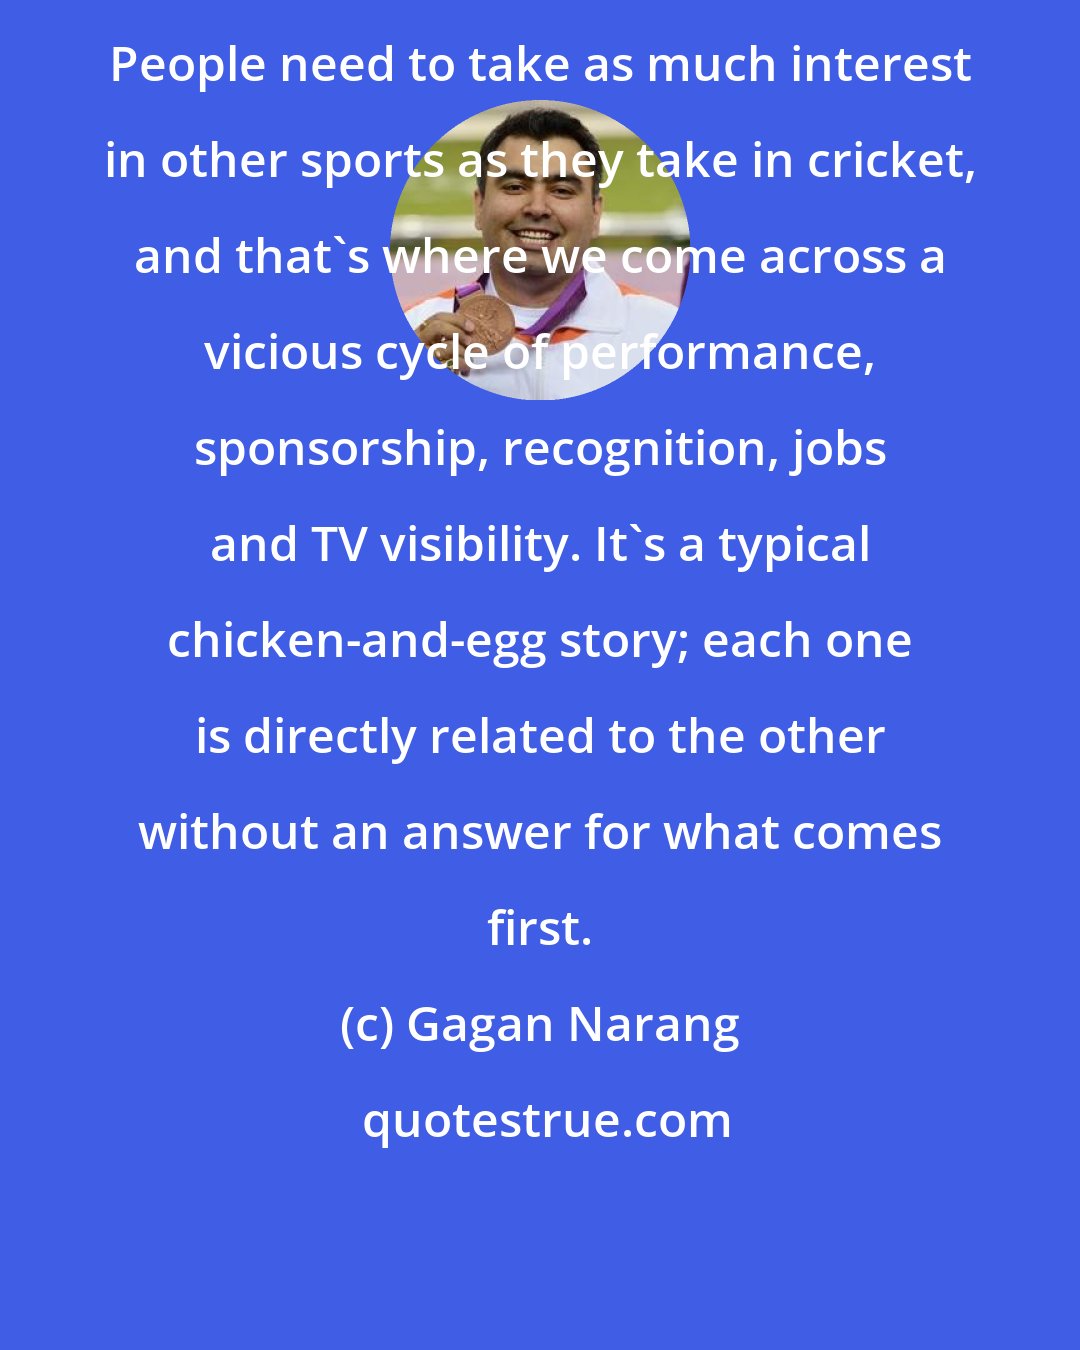 Gagan Narang: People need to take as much interest in other sports as they take in cricket, and that's where we come across a vicious cycle of performance, sponsorship, recognition, jobs and TV visibility. It's a typical chicken-and-egg story; each one is directly related to the other without an answer for what comes first.